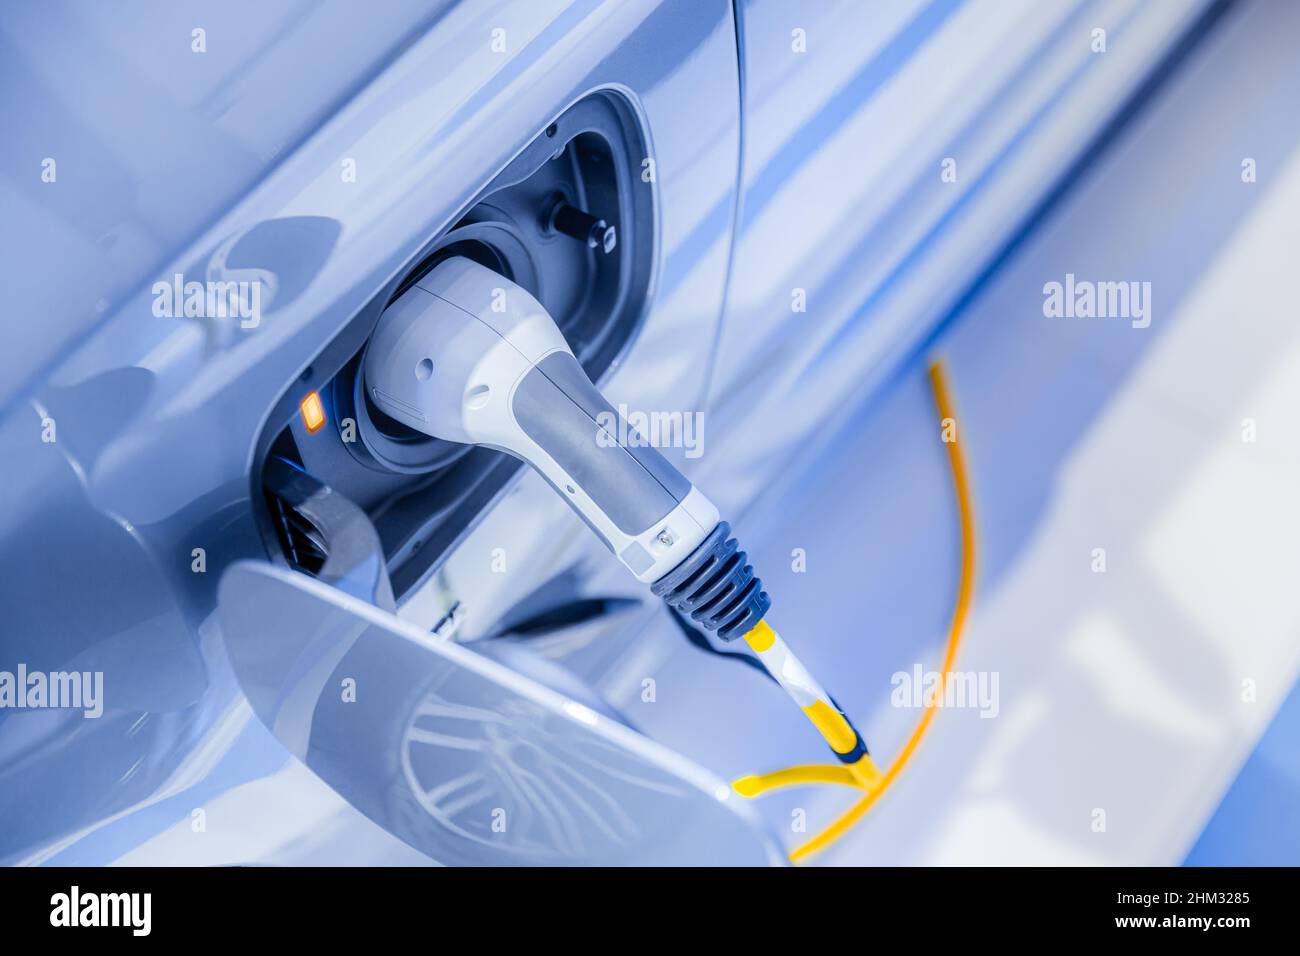 electricity car or EV car plug in power charging at power station future driving concept Stock Photo